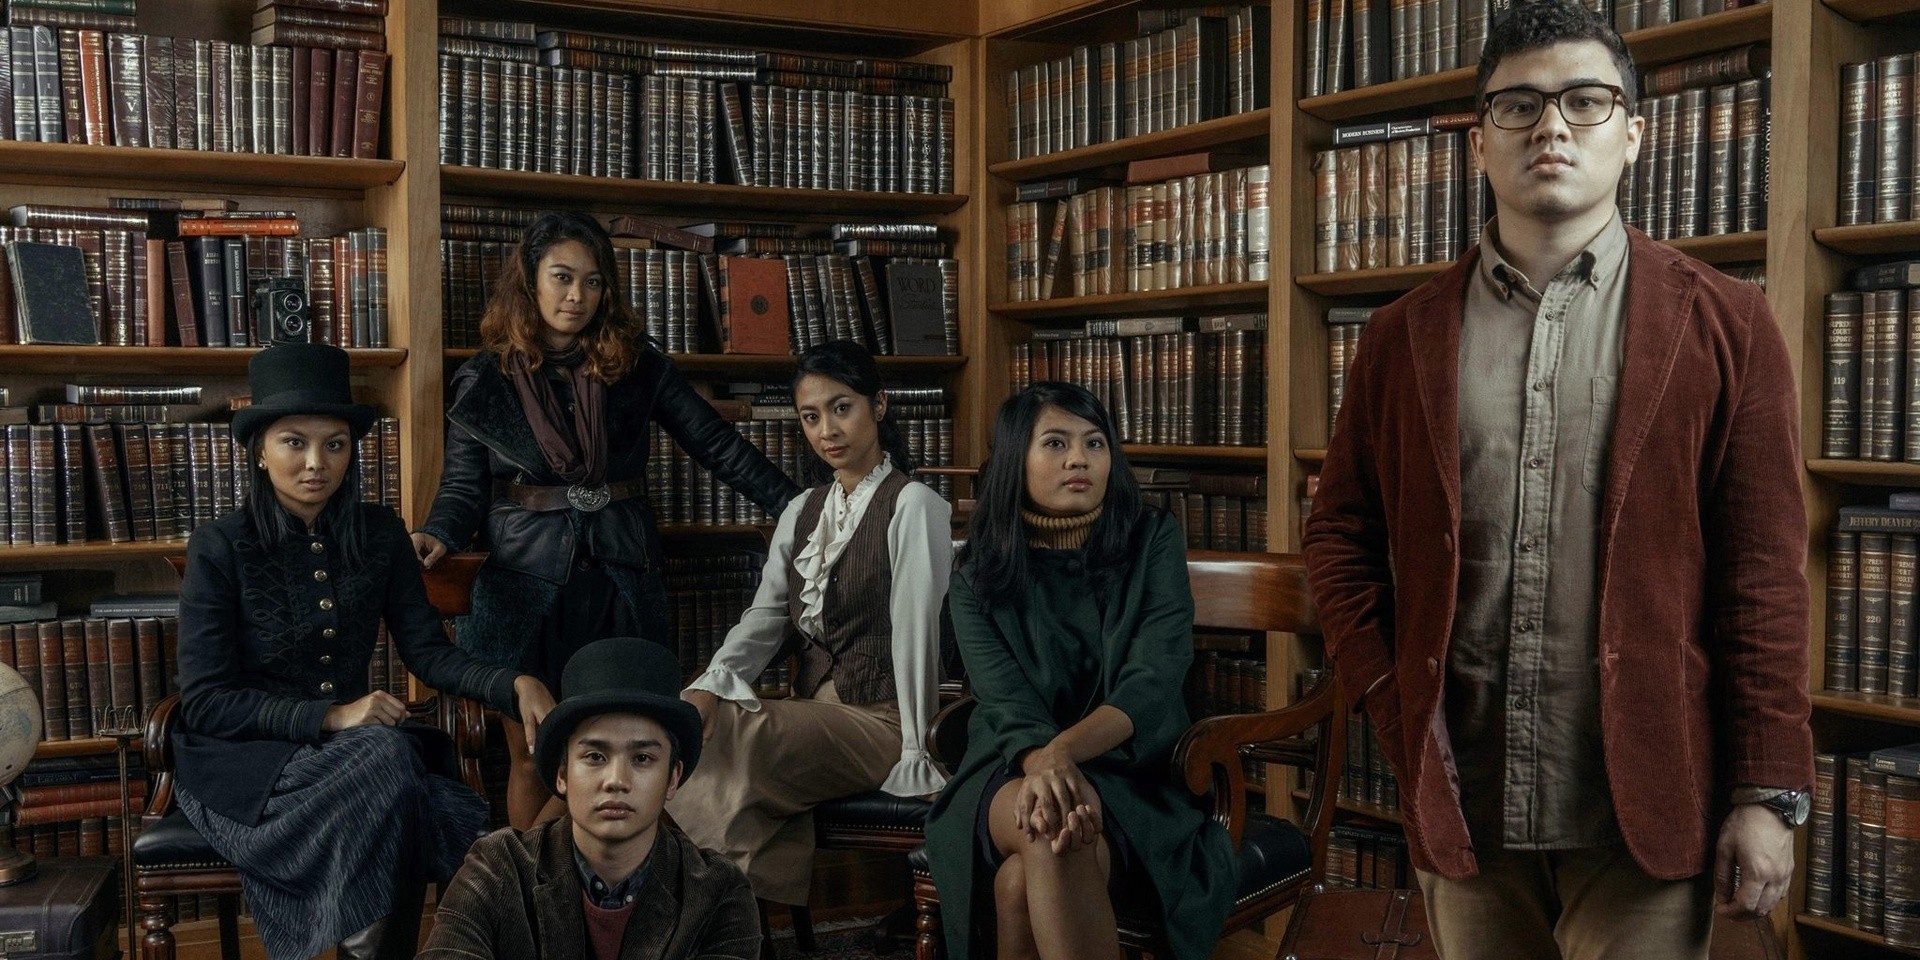 The Ransom Collective reveal debut album release date